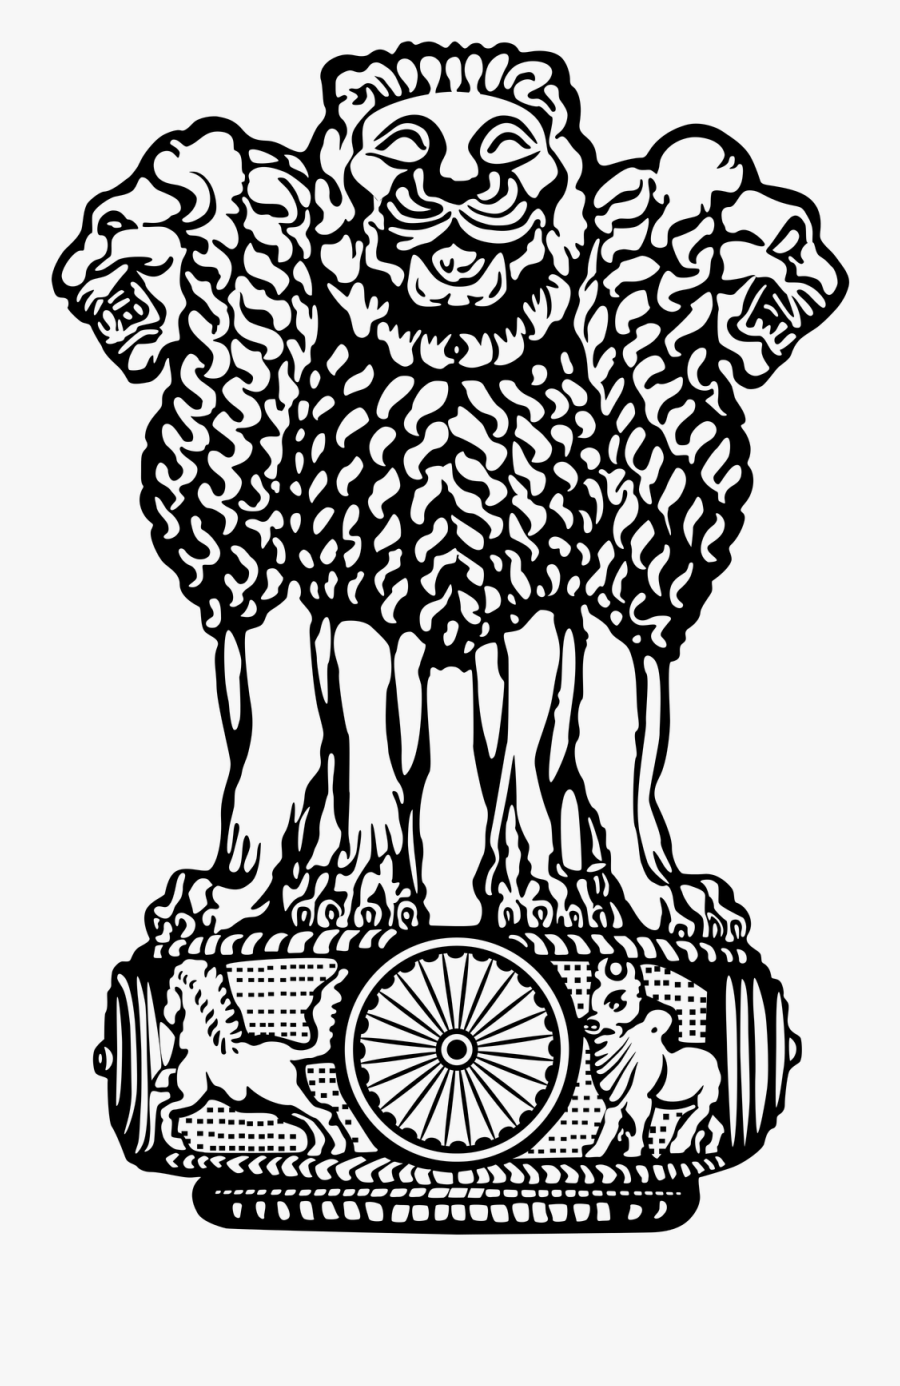 Official Seal Of India, Transparent Clipart